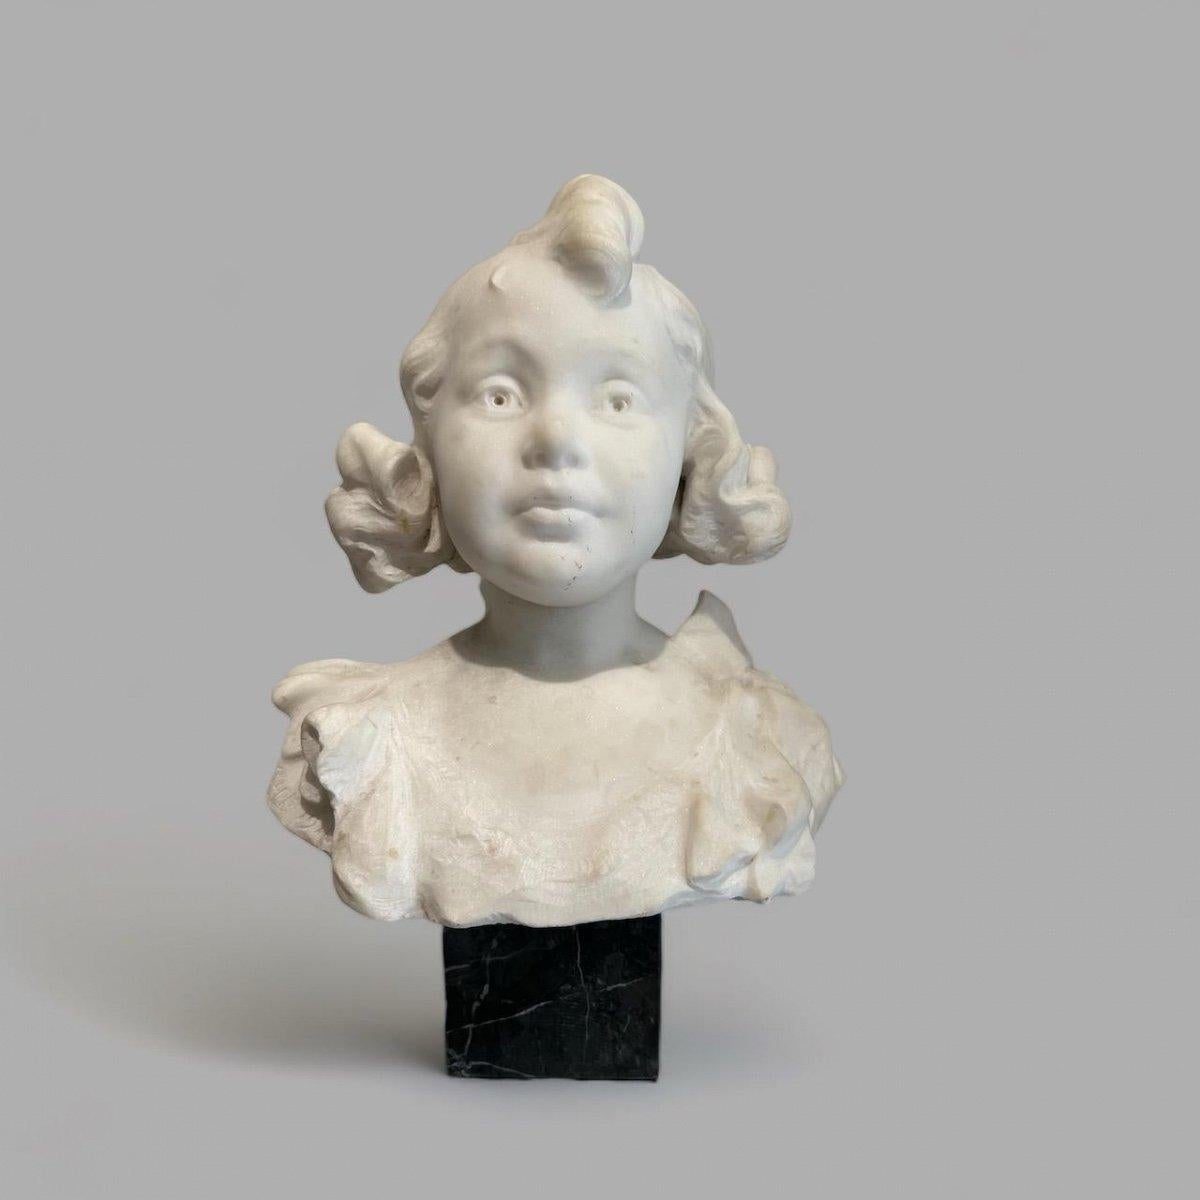 This bust of a young girl in Carrara marble from the late 19th century beautifully captures the innocence and charm expressed on the subject's face. The sculpture exudes remarkable expressiveness which is particularly evident in the delicately